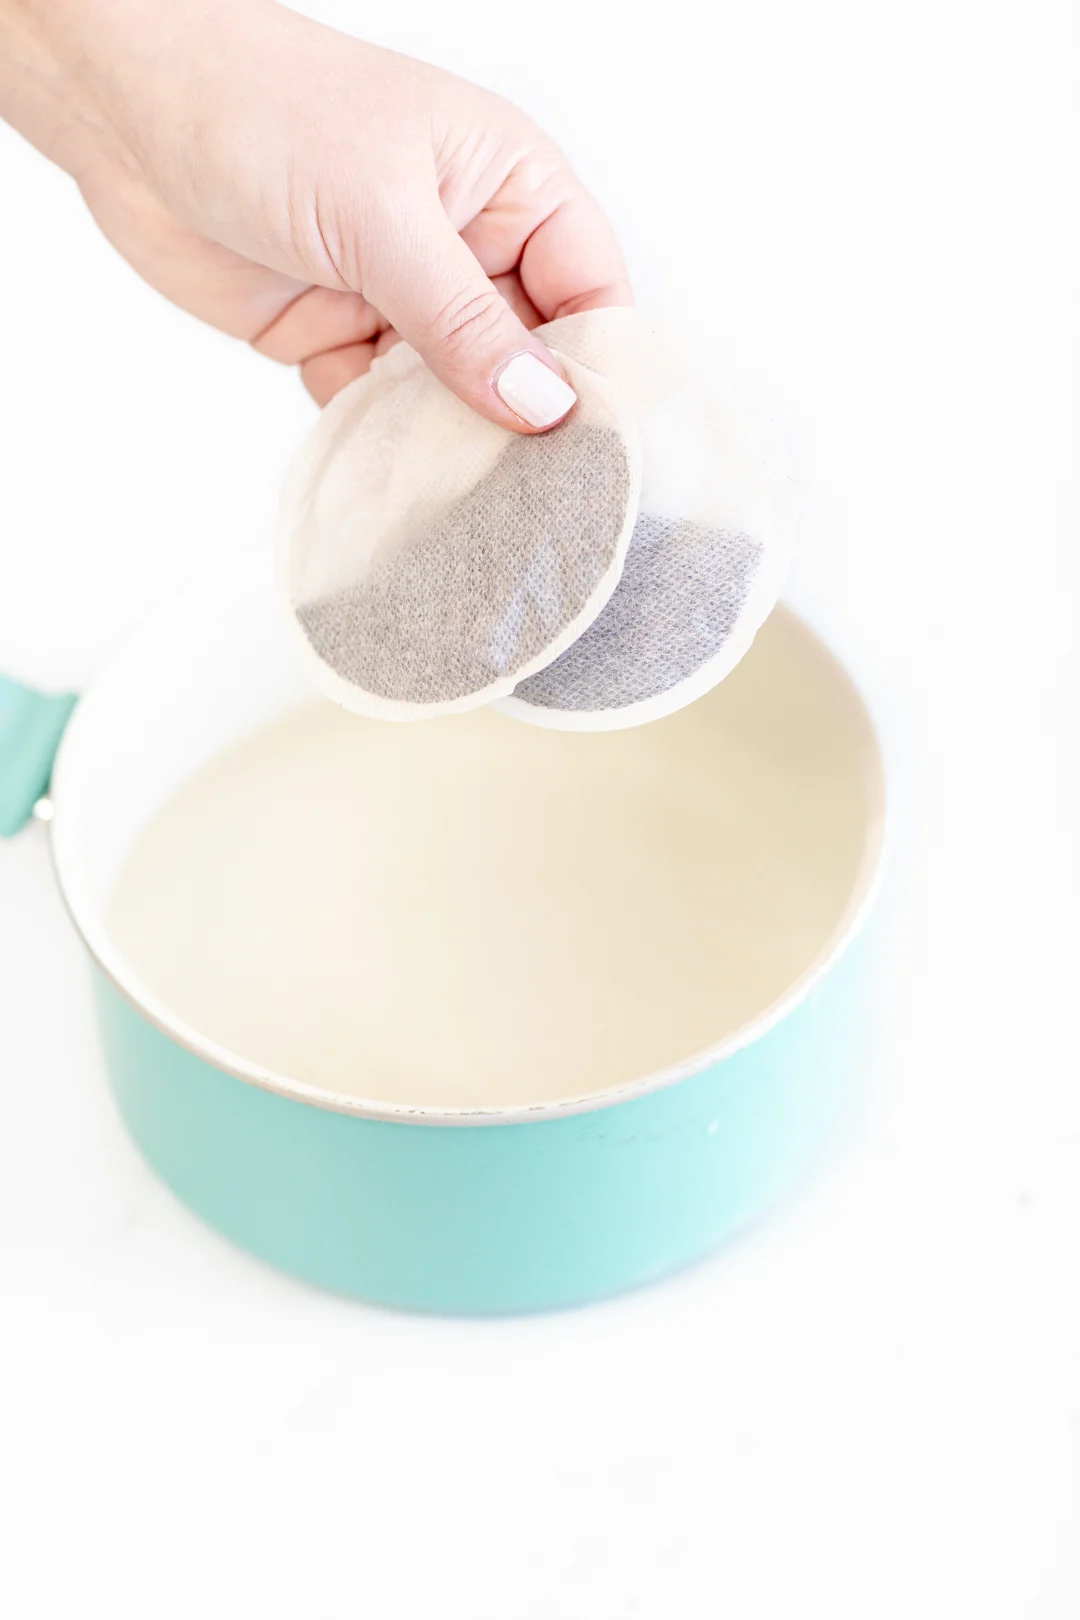 placing round iced tea bags into a potplacing round iced tea bags into a pot